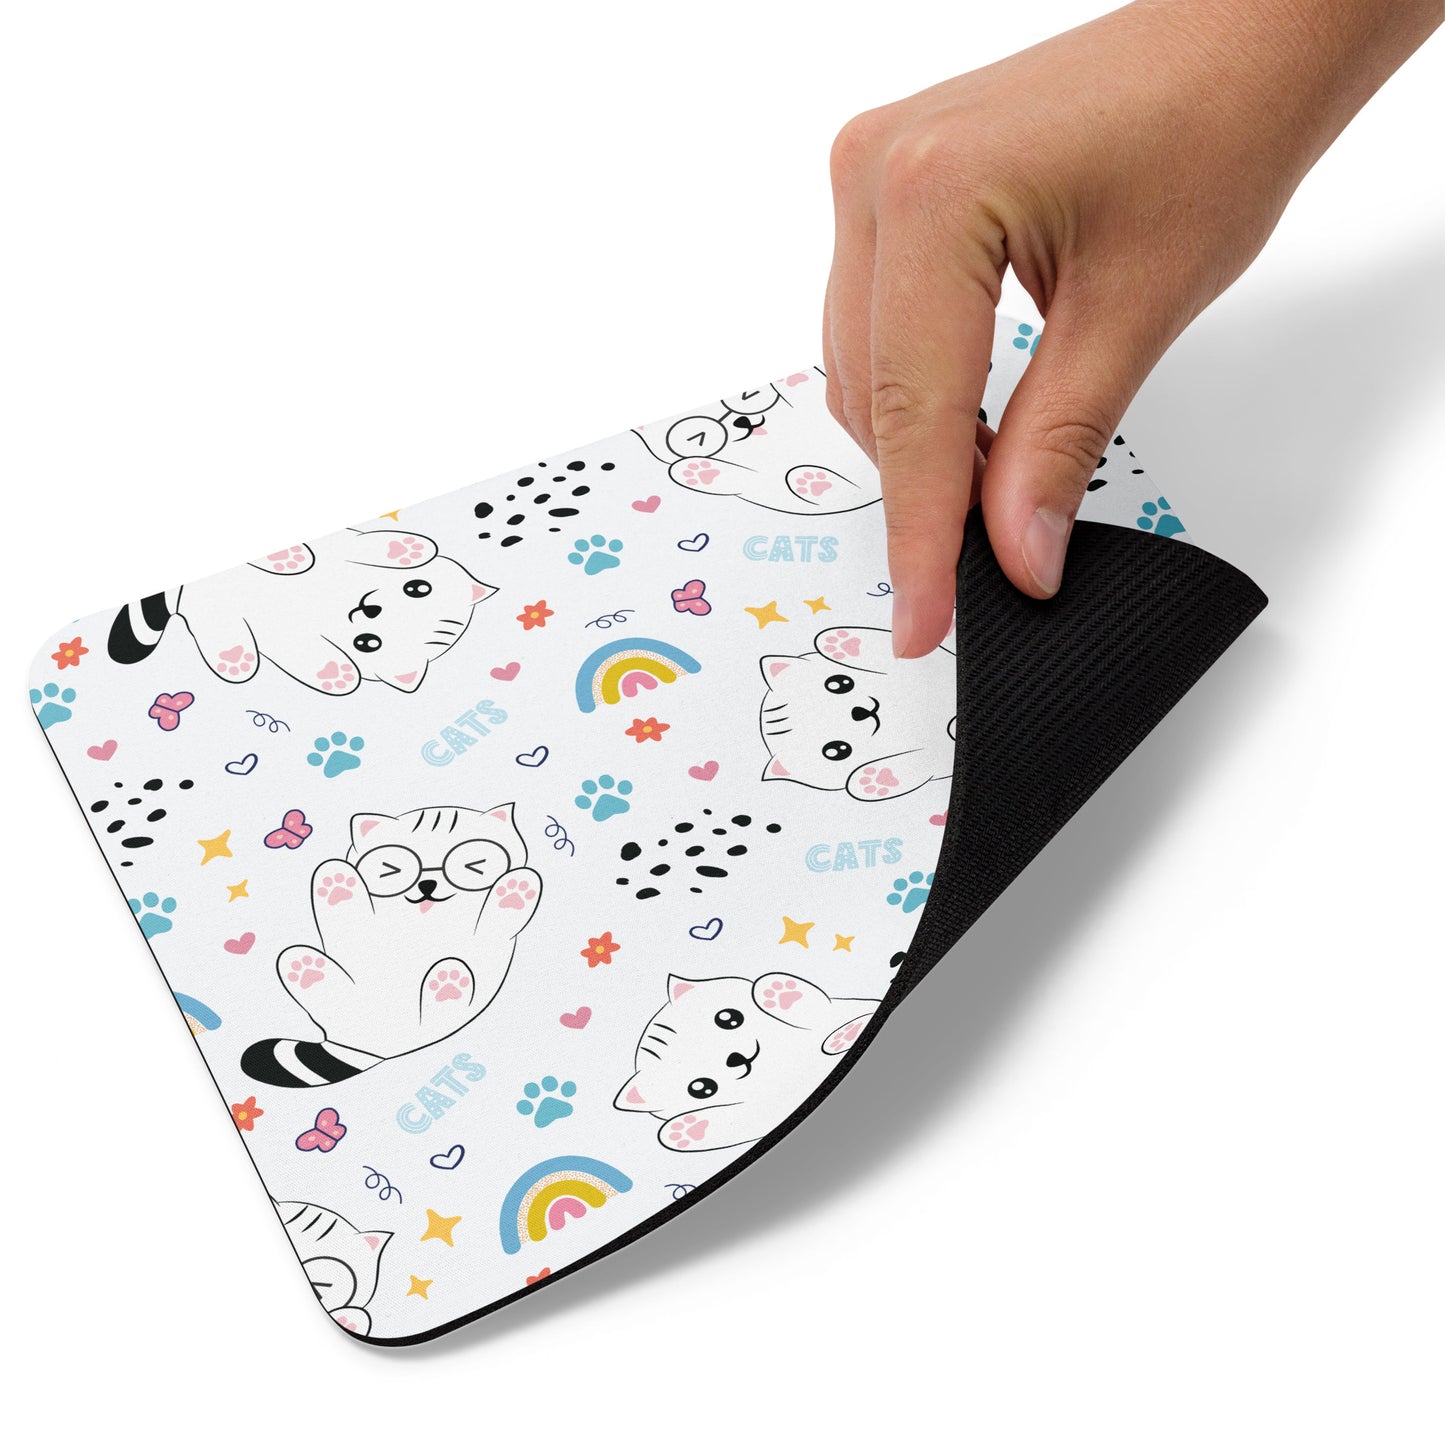 Rainbow Cats Kitty Cute Kawaii Gaming Mouse pad, Computer Keyboard Office Accessories, Cute Office Decor